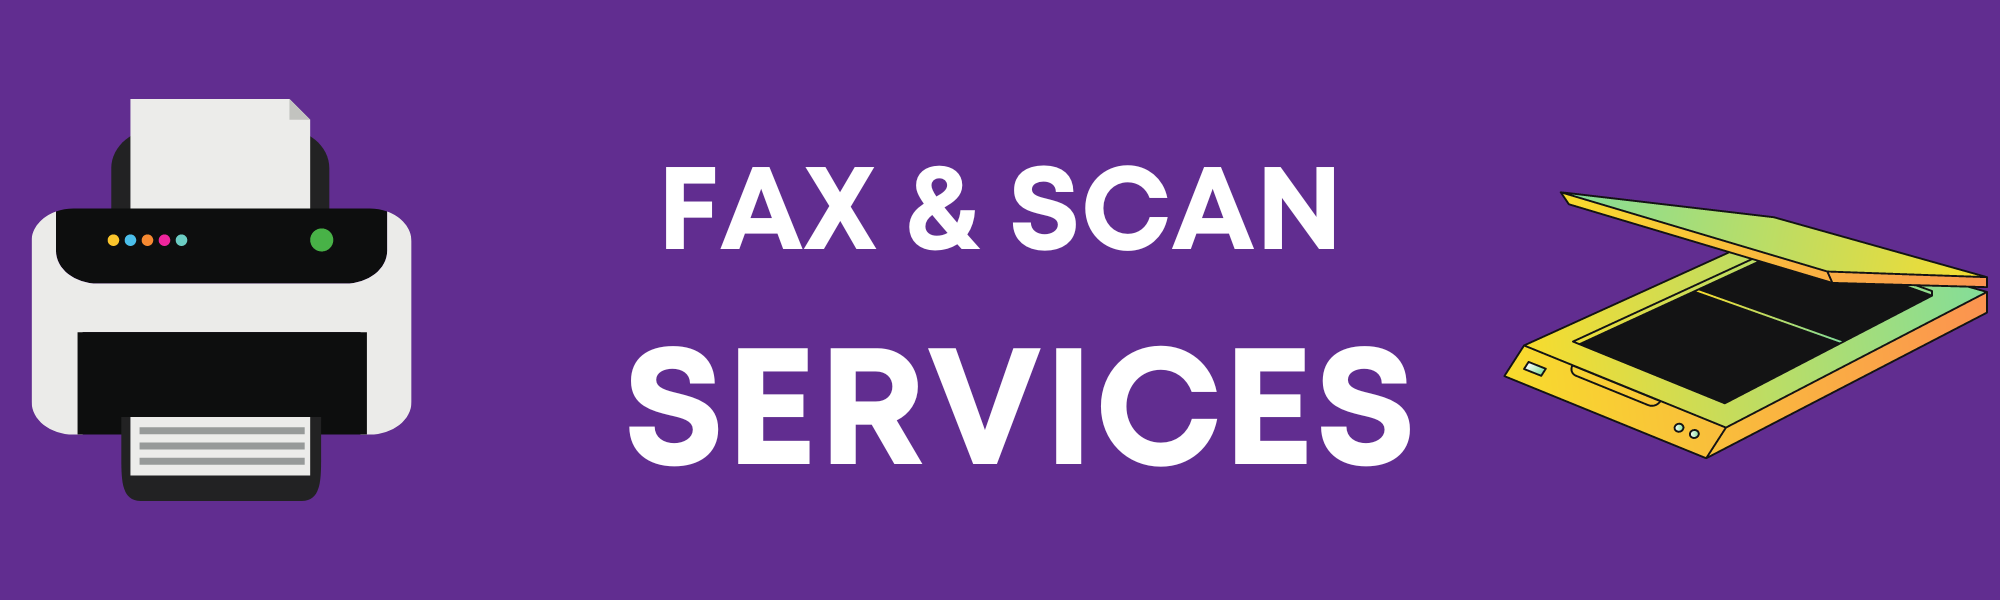 Fax & Scan Services